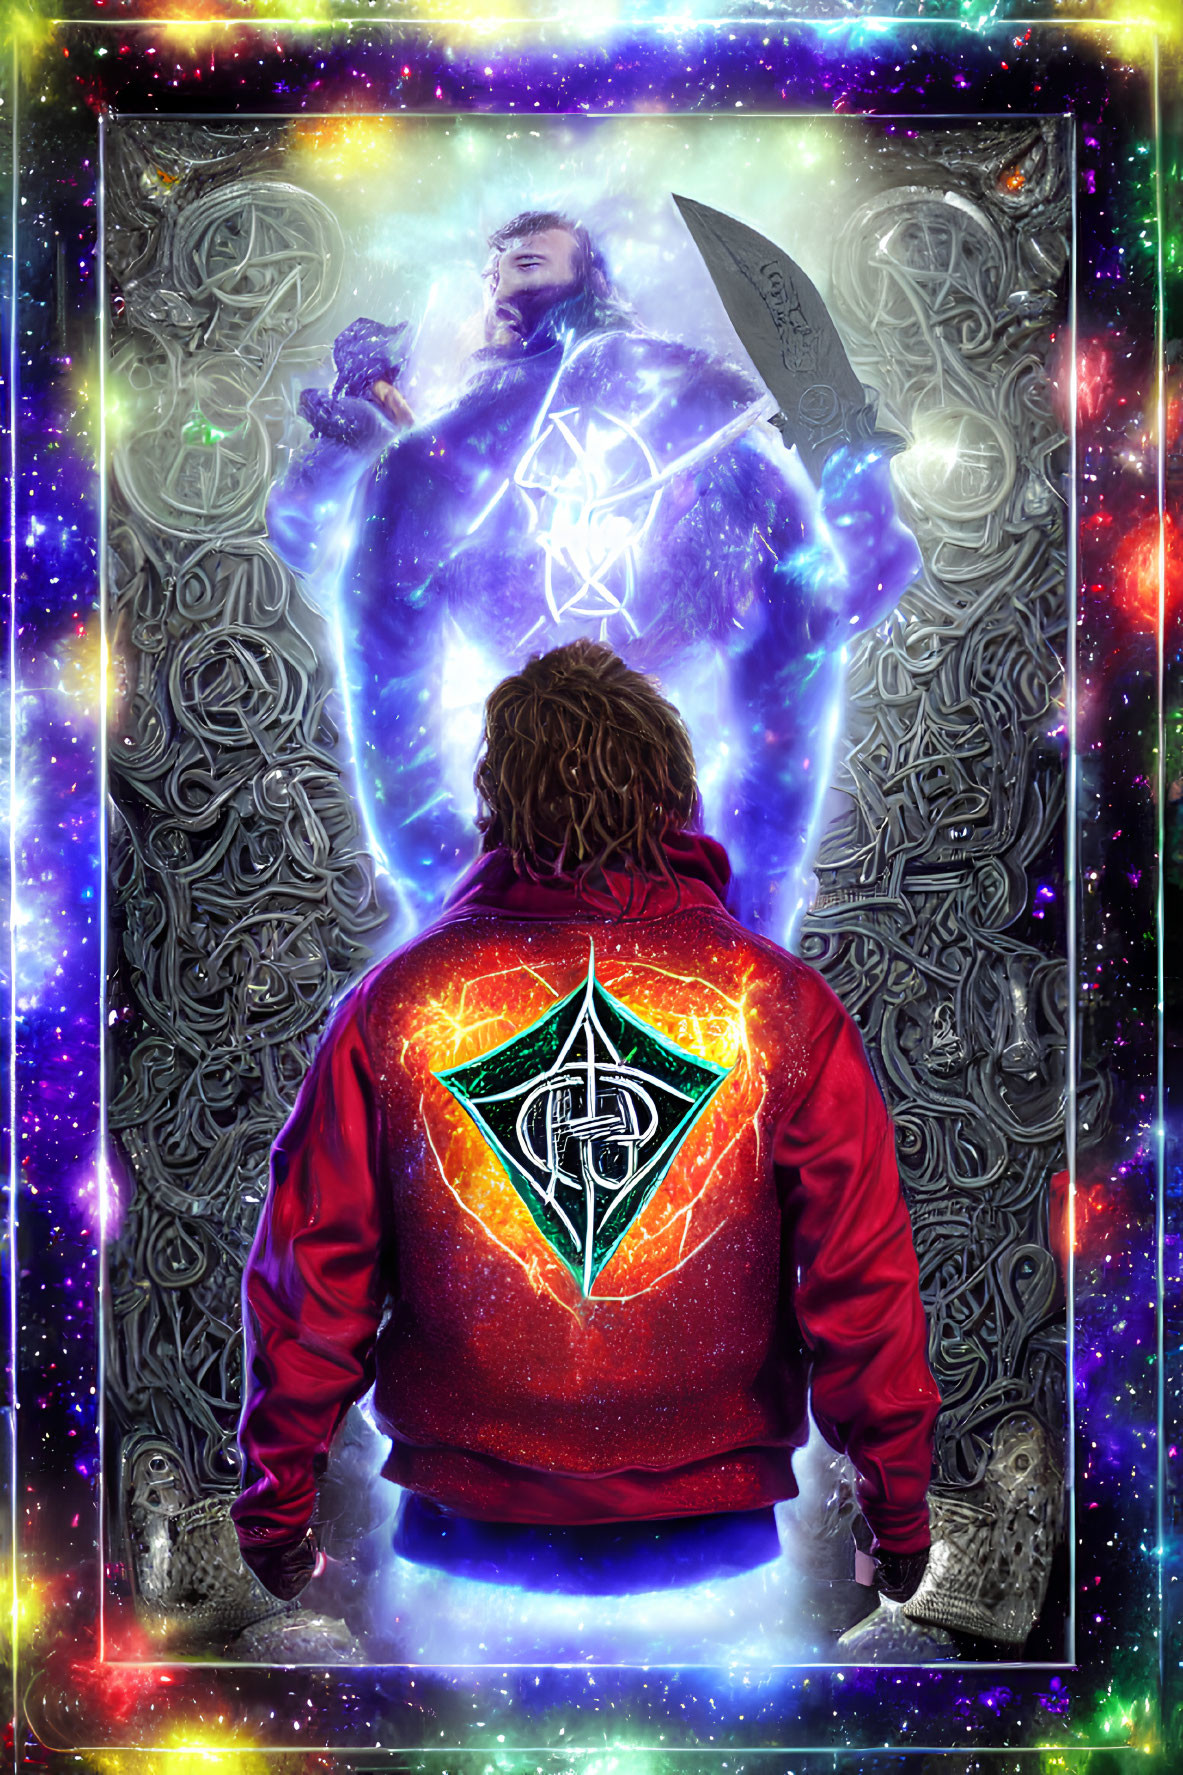 Red Jacket with Green Symbol Gazing at Cosmic Figure Holding Sword